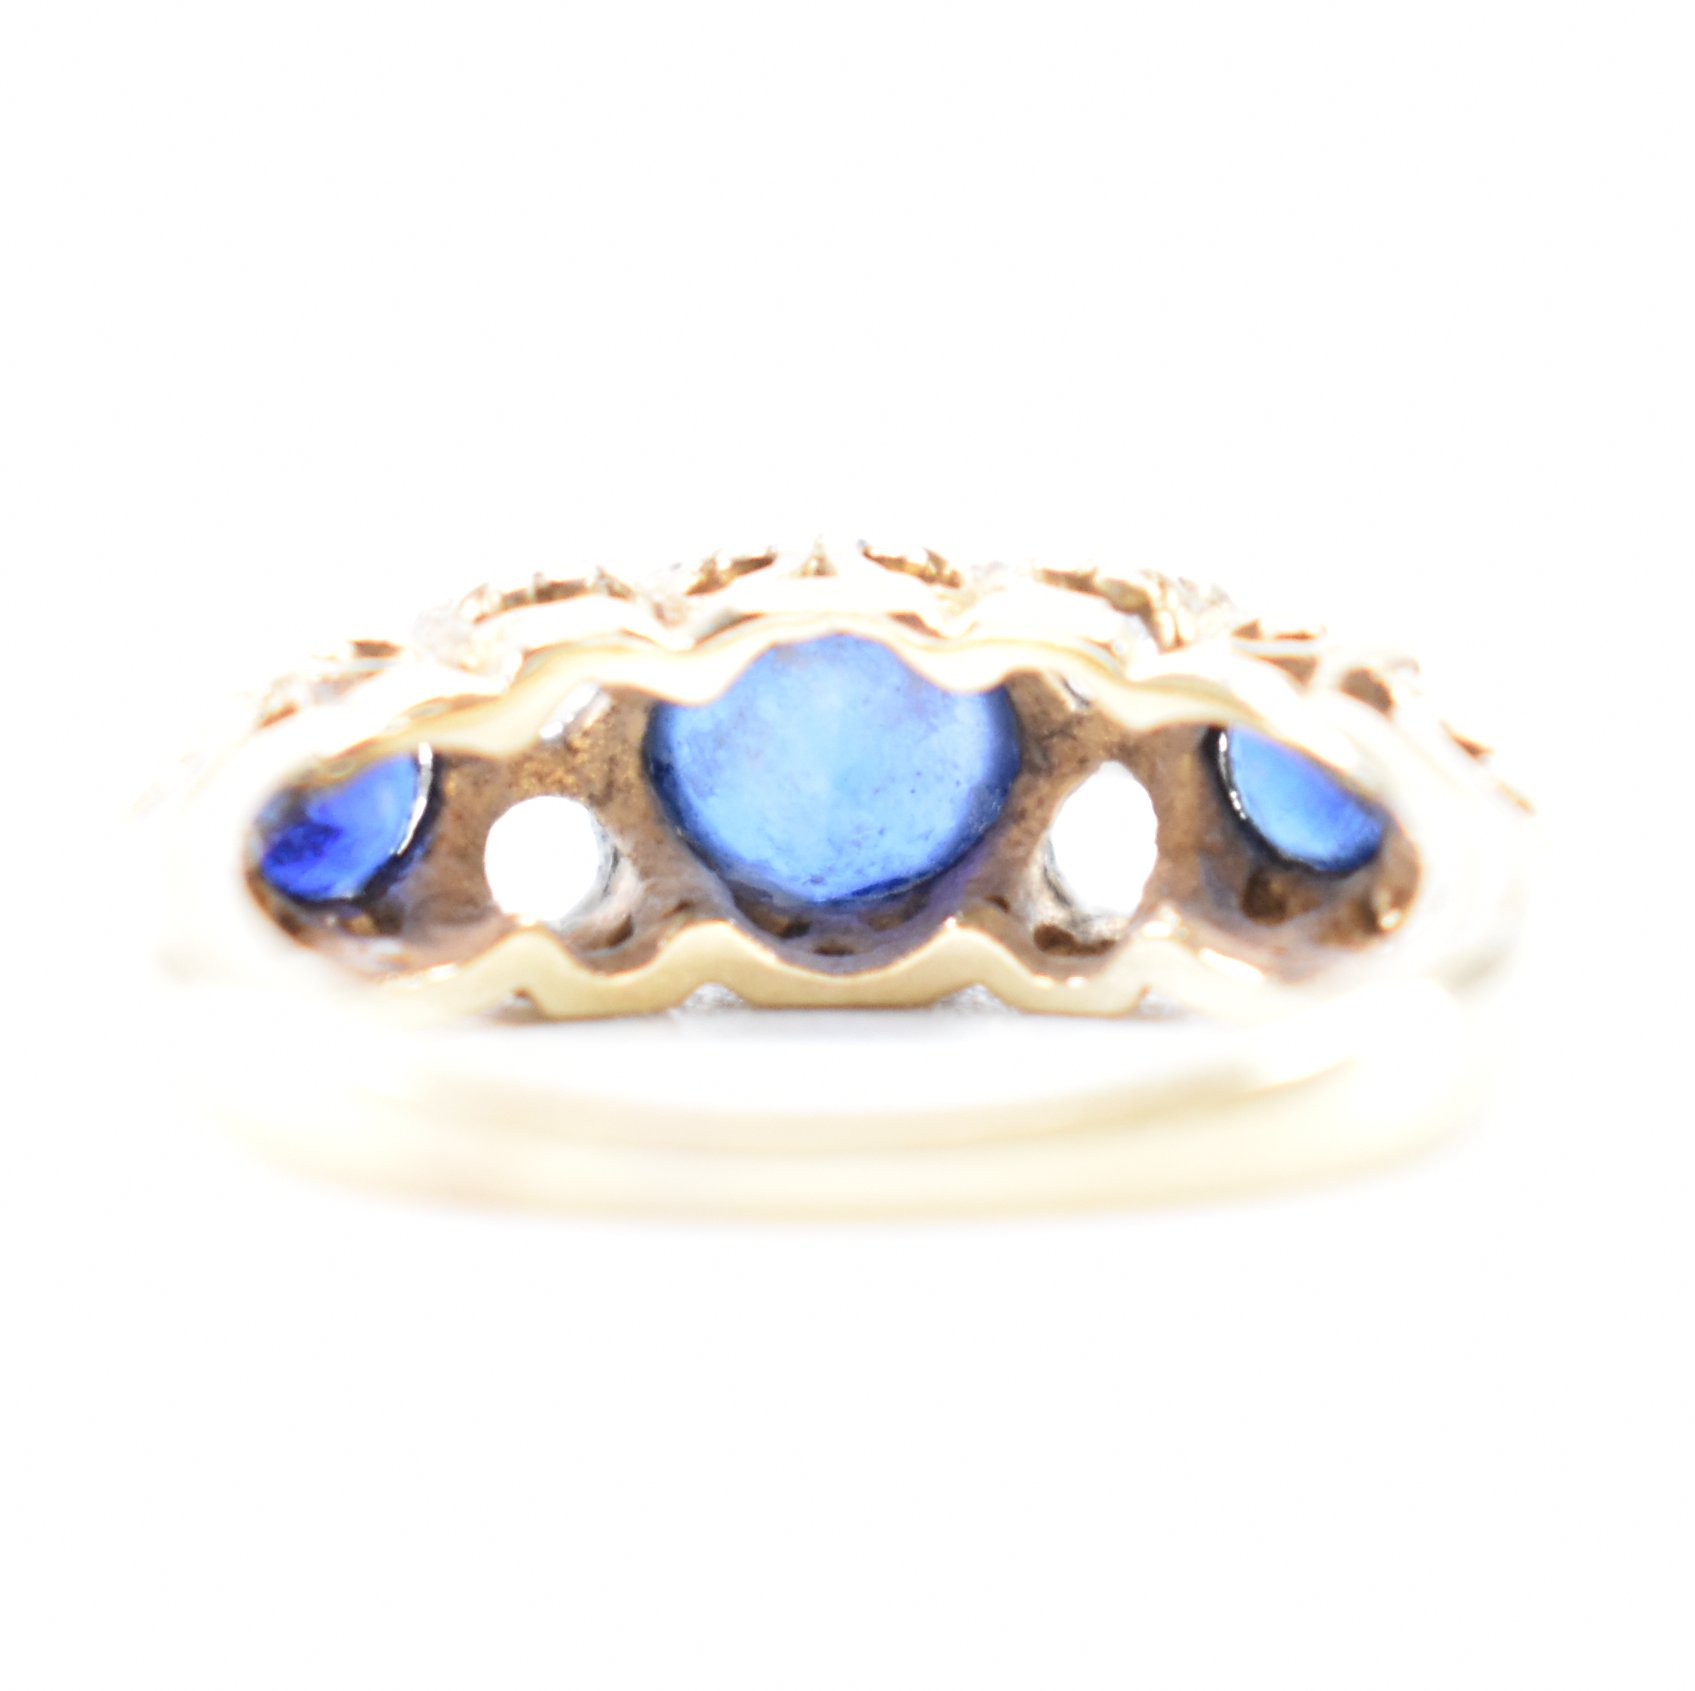 HALLMARKED 9CT GOLD BLUE & WHITE STONE RING - Image 3 of 8